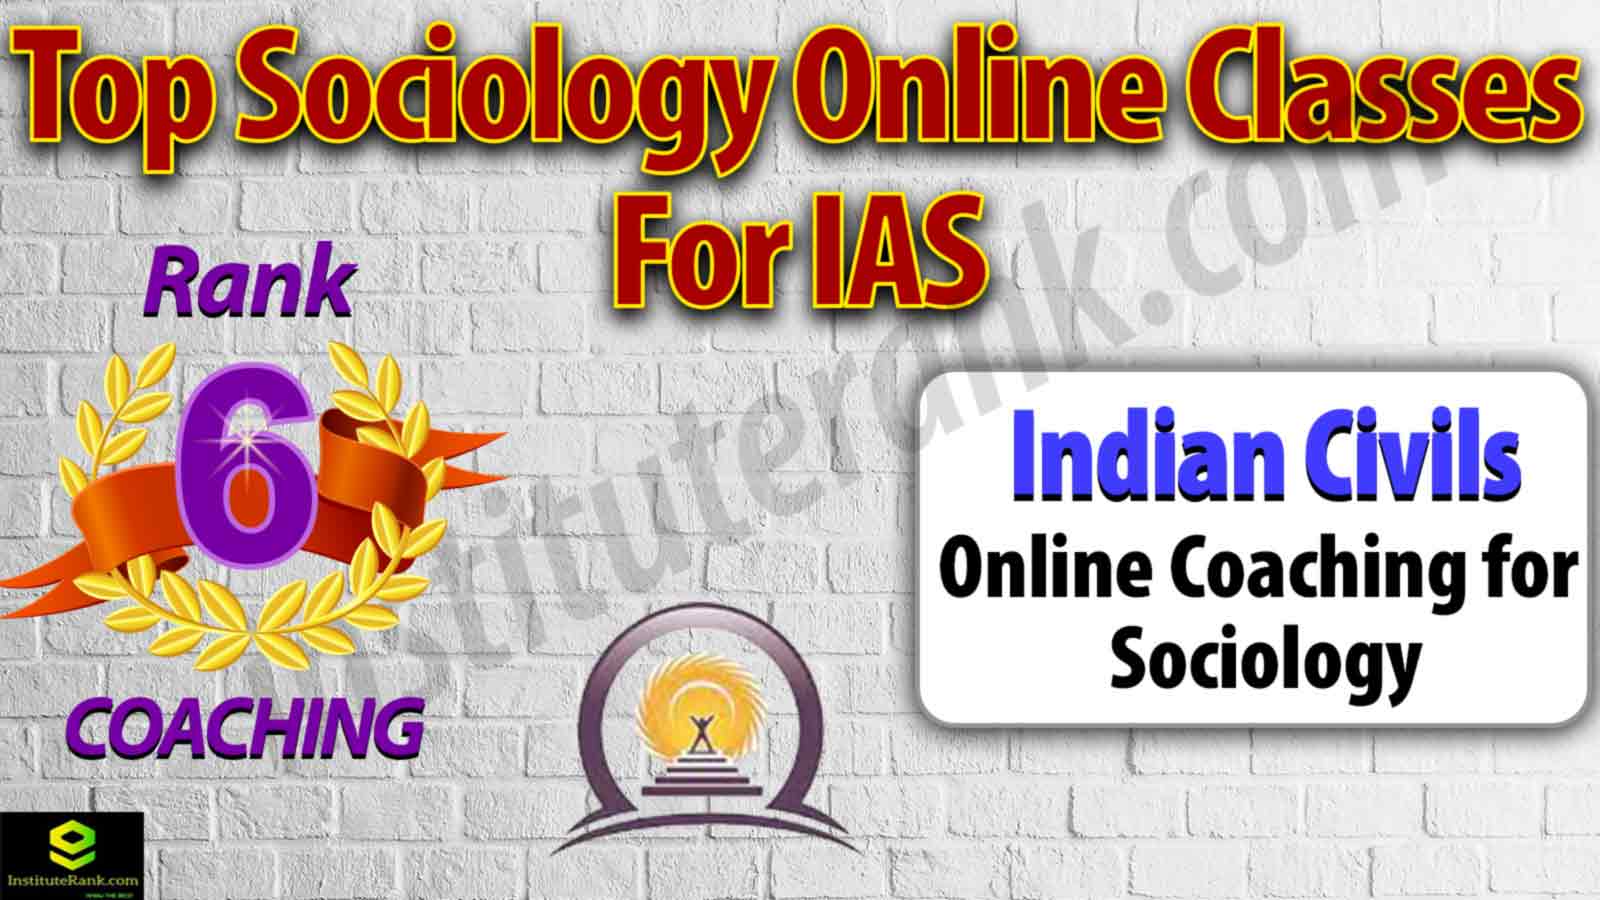 Top Sociology Online Classes for Civil Services